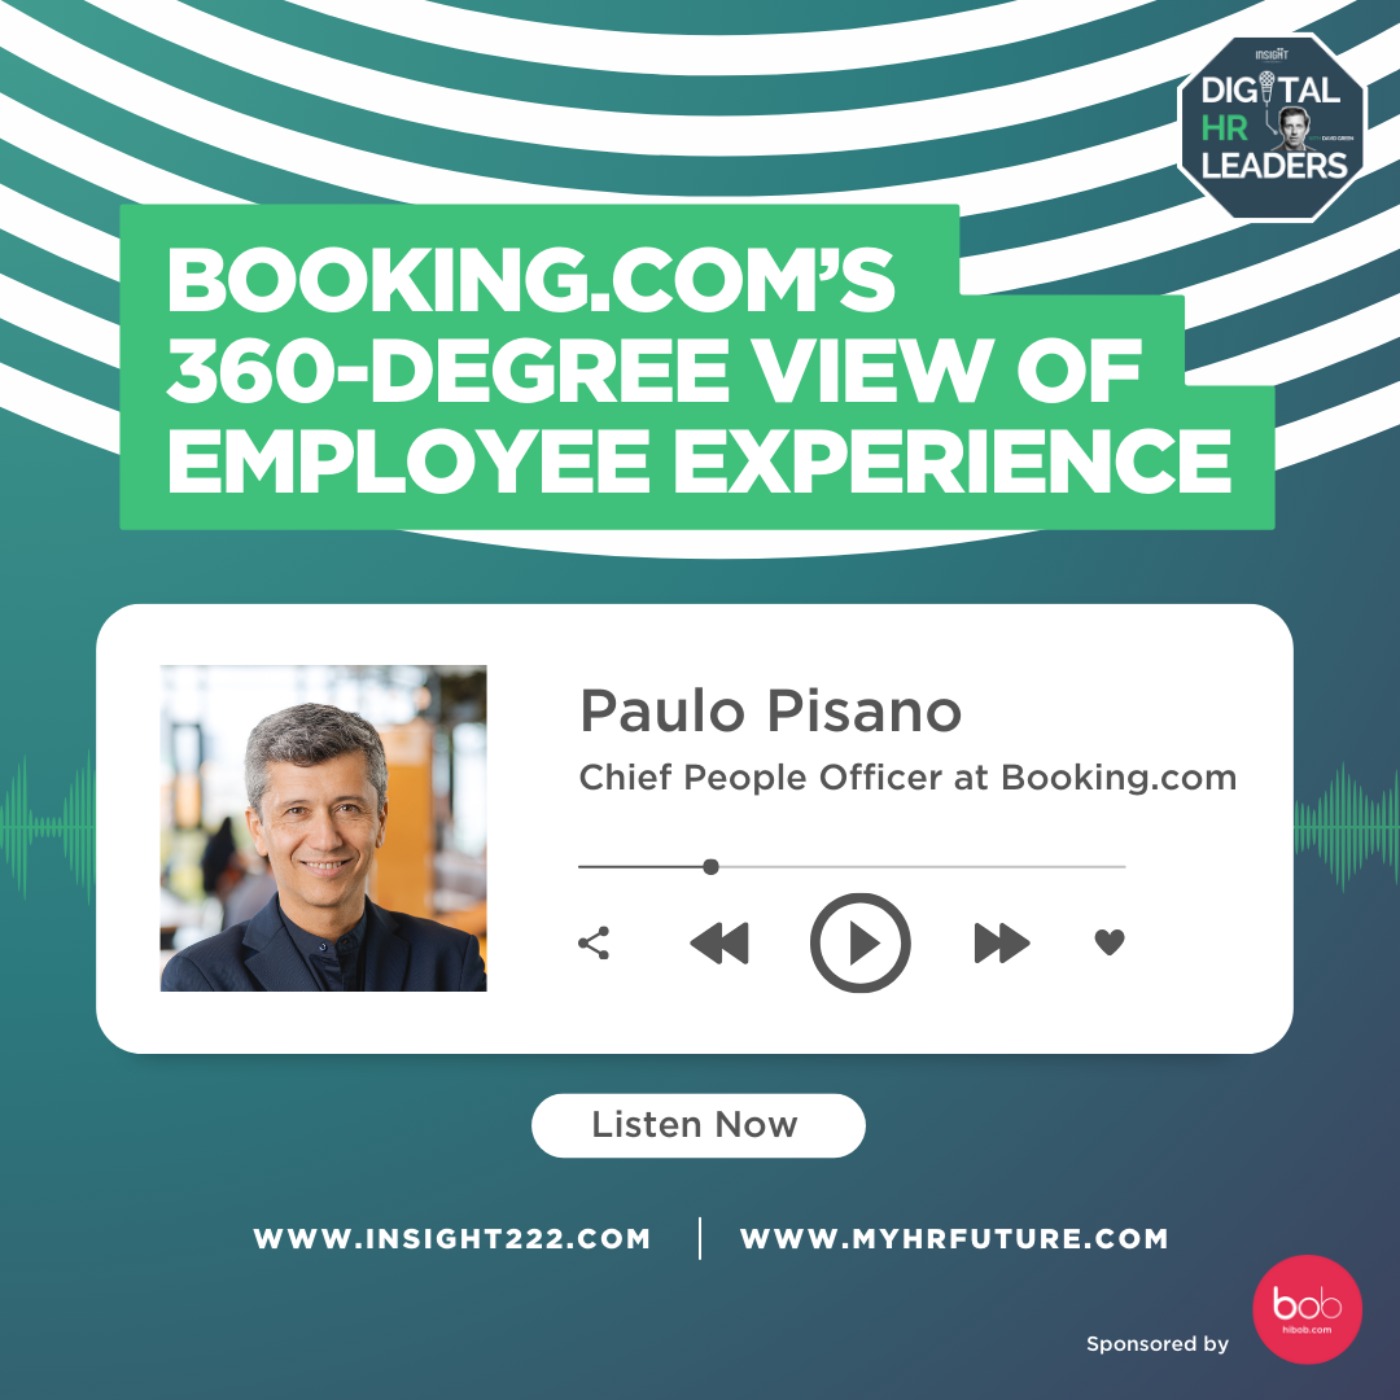 Booking.com’s 360-Degree View of Employee Experience (an Interview with Paulo Pisano)